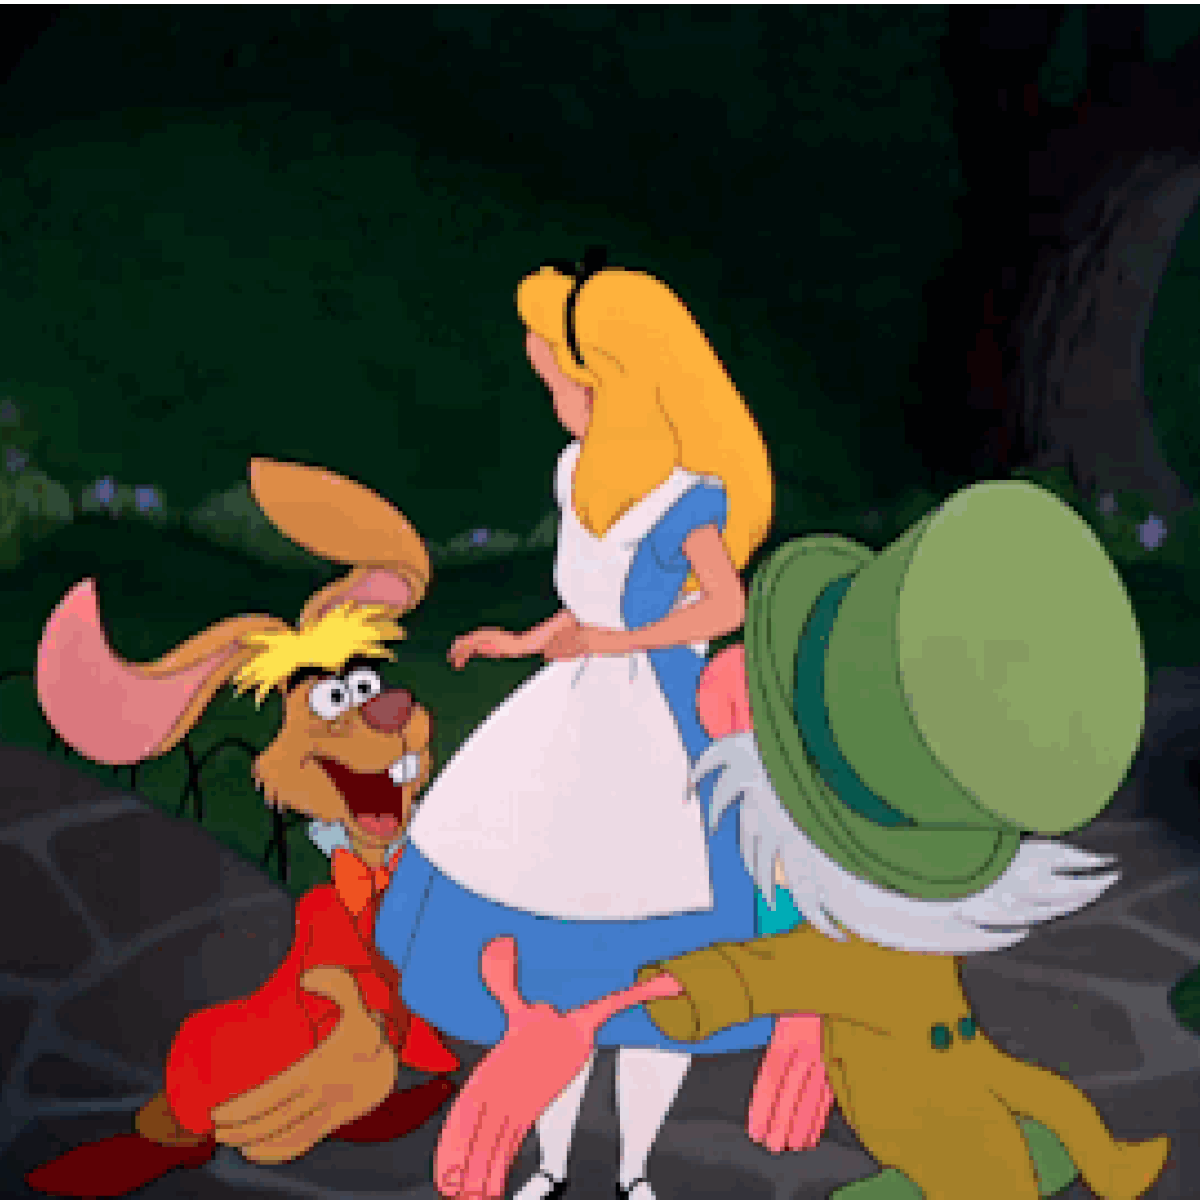 who are you caterpillar gif alice in wonderland